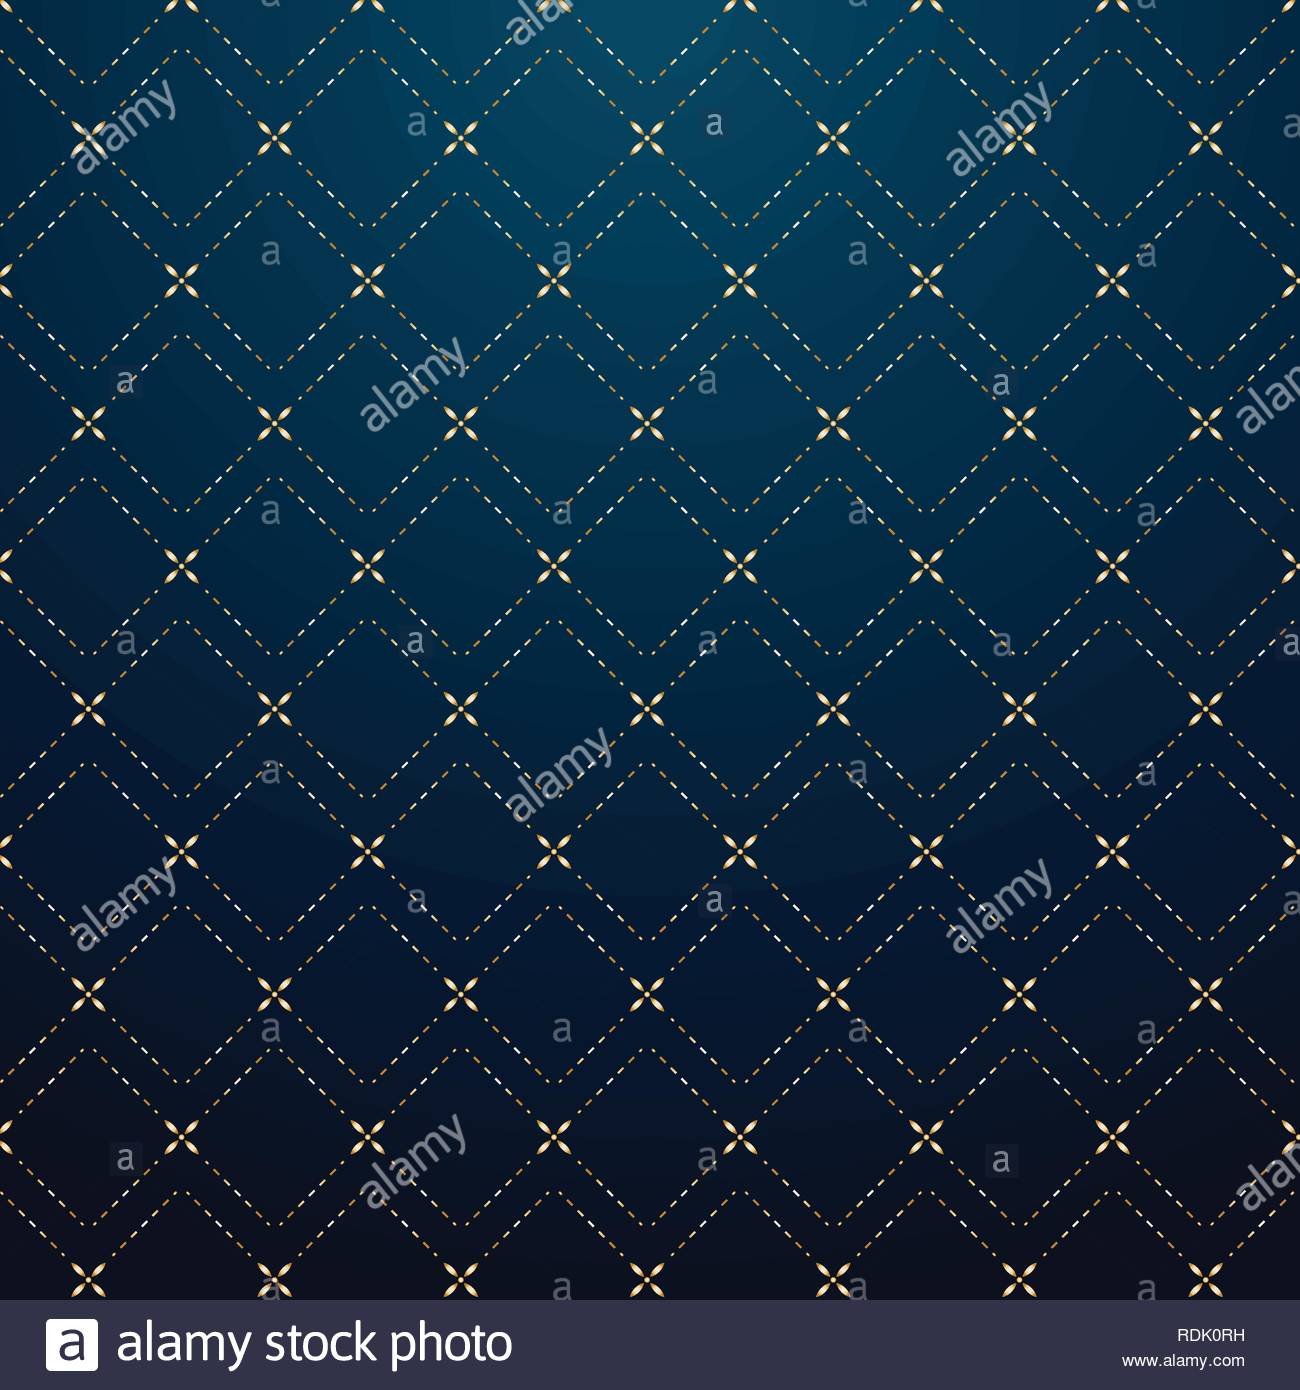 Abstract Geometric Squares Gold Dash Line Pattern On Dark Blue